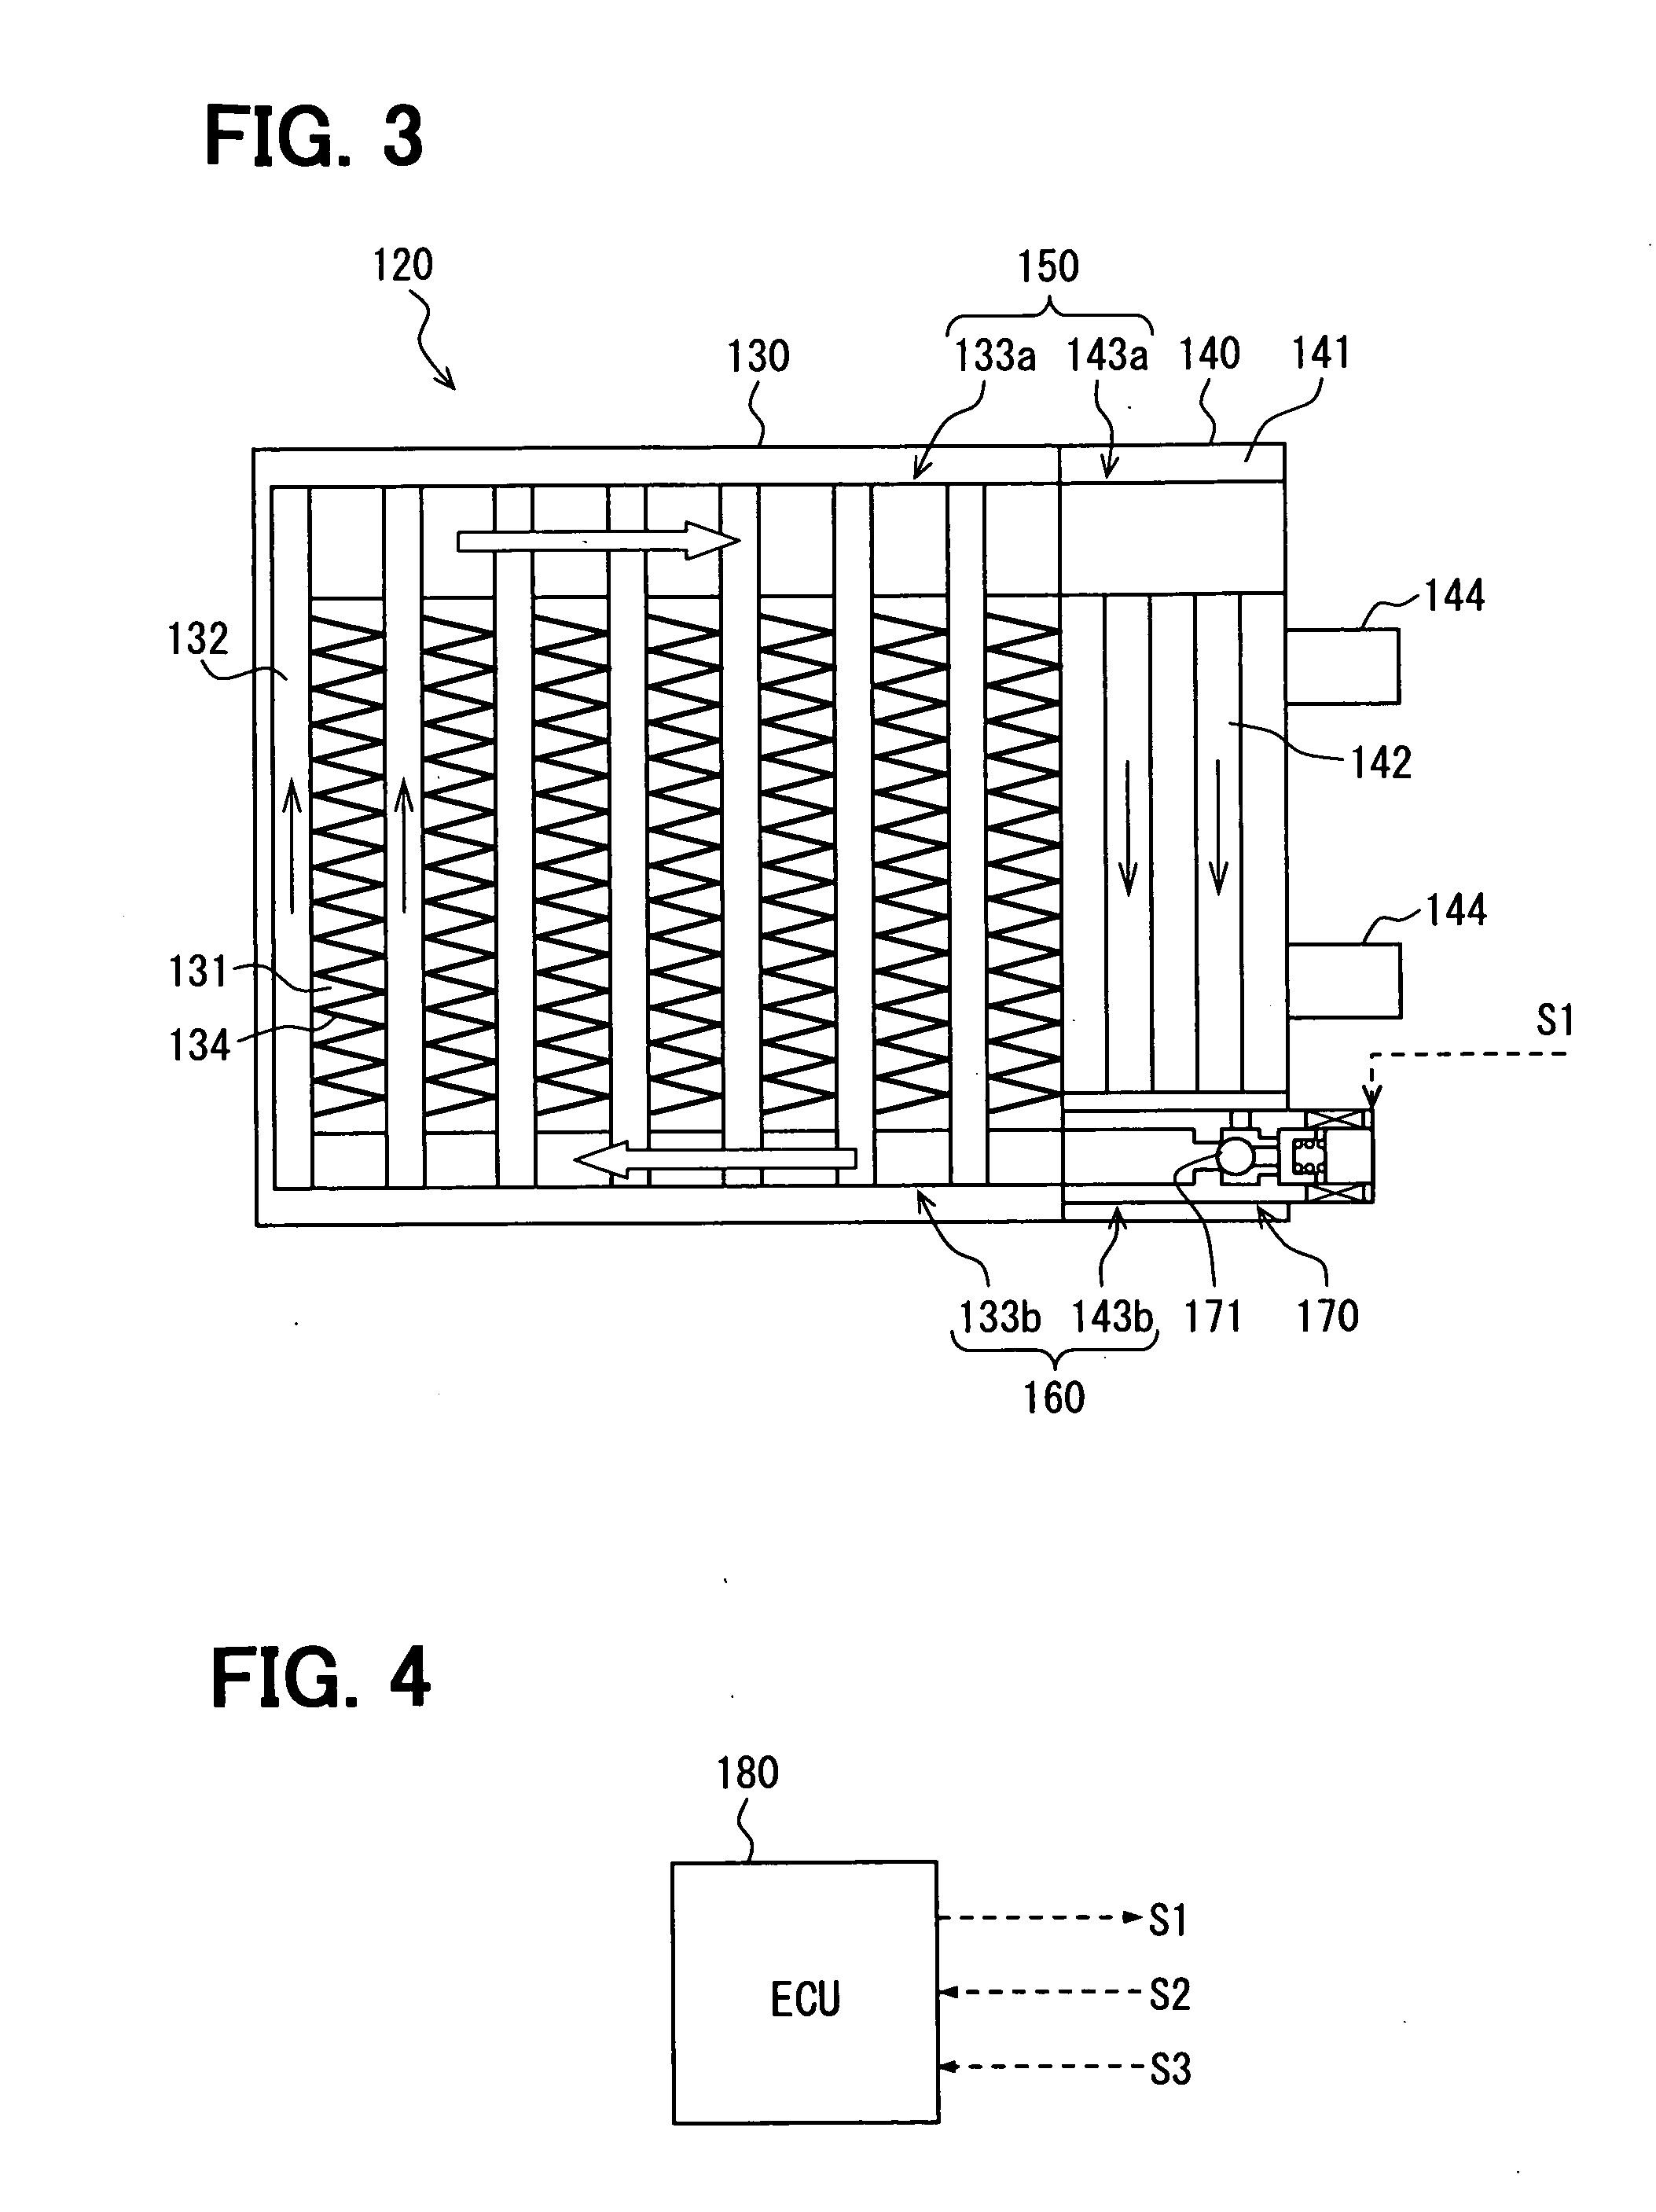 Exhaust heat recovery device